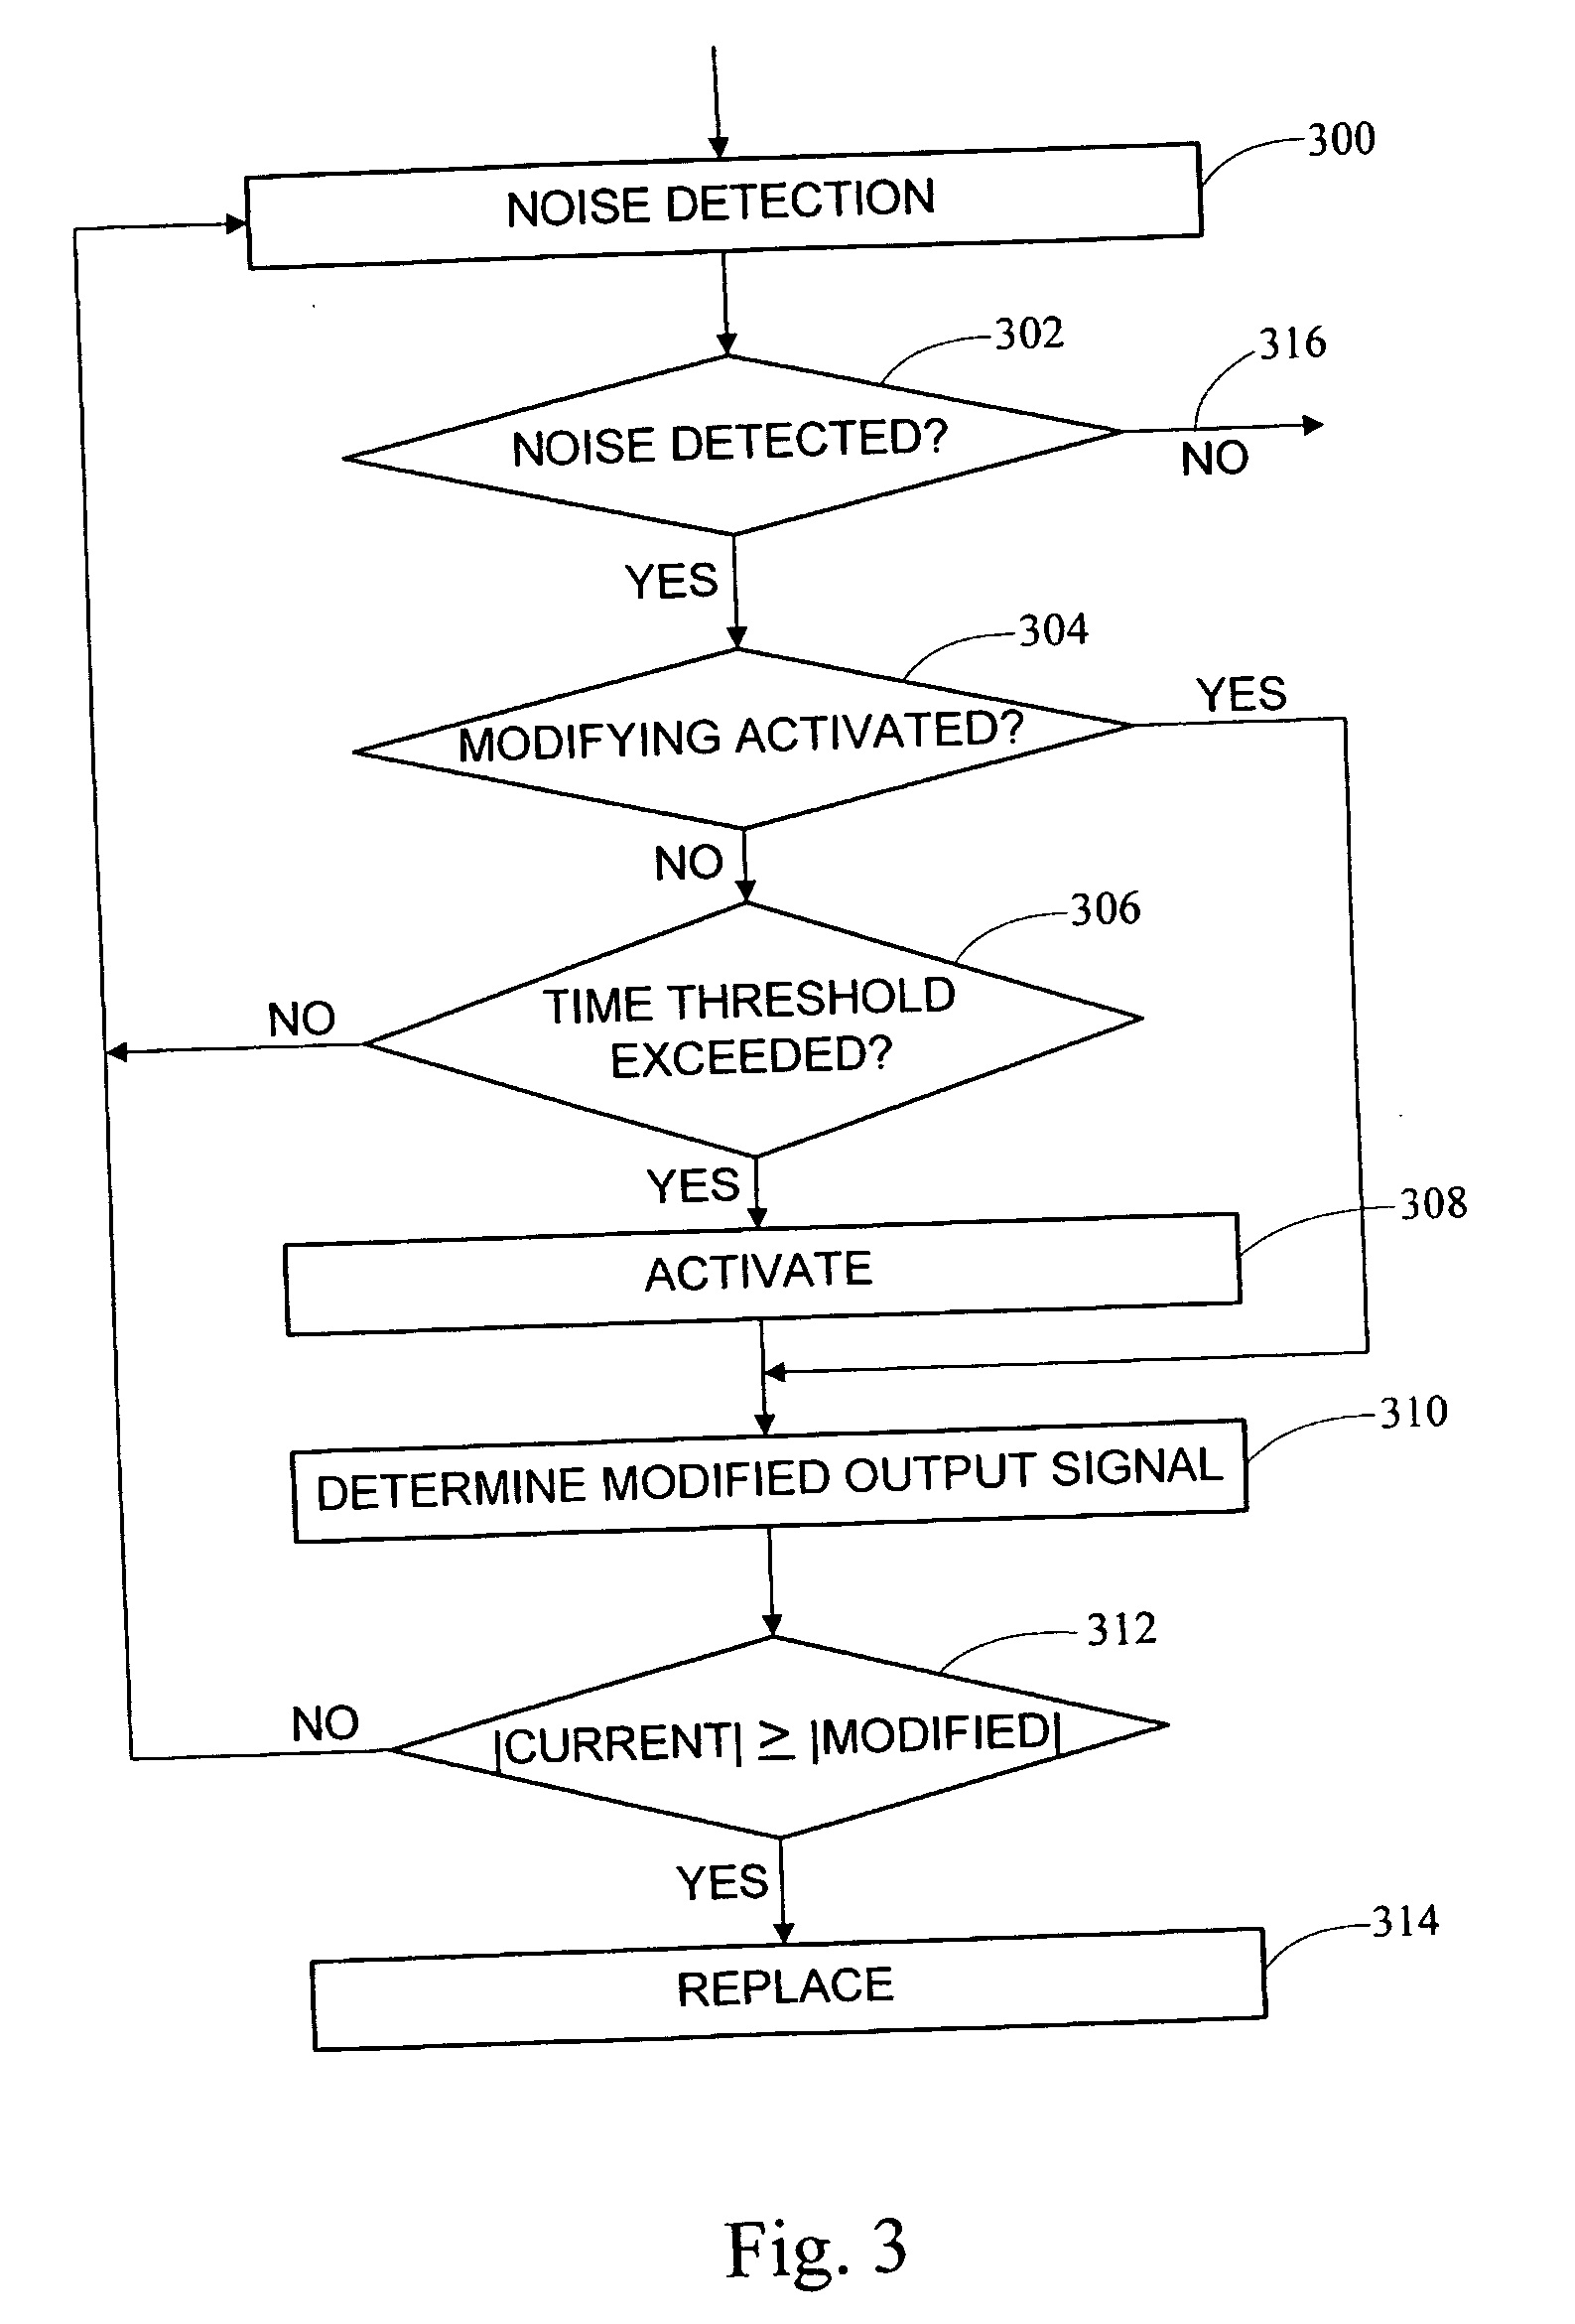 System for detecting and reducing noise via a microphone array